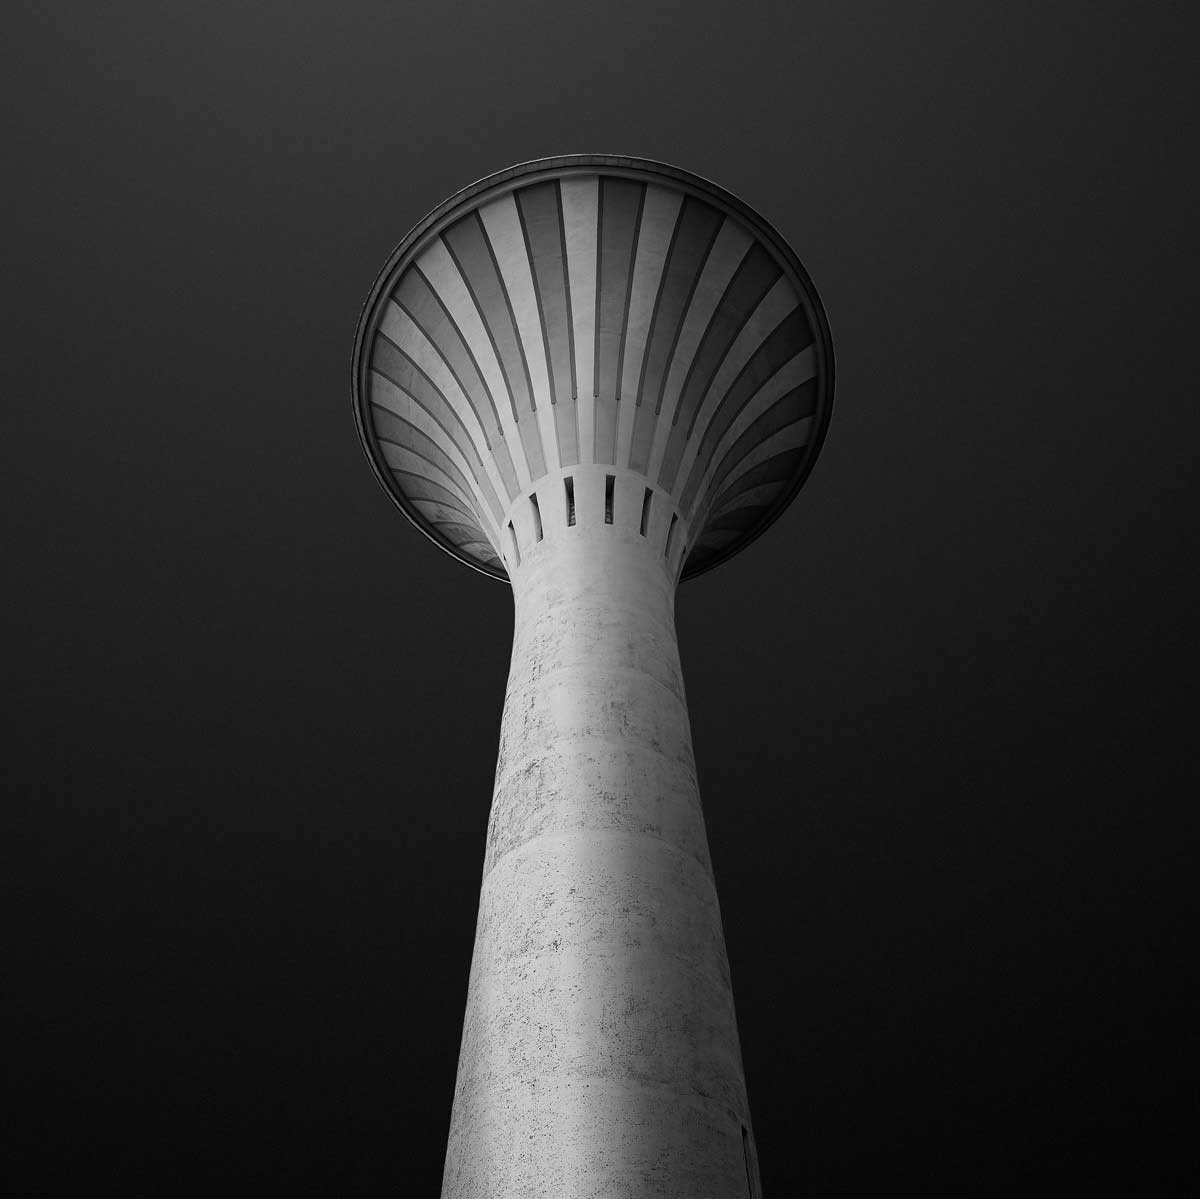 Water towers of Luxembourg : A Pictographic Study | Gediminas Karbauskis